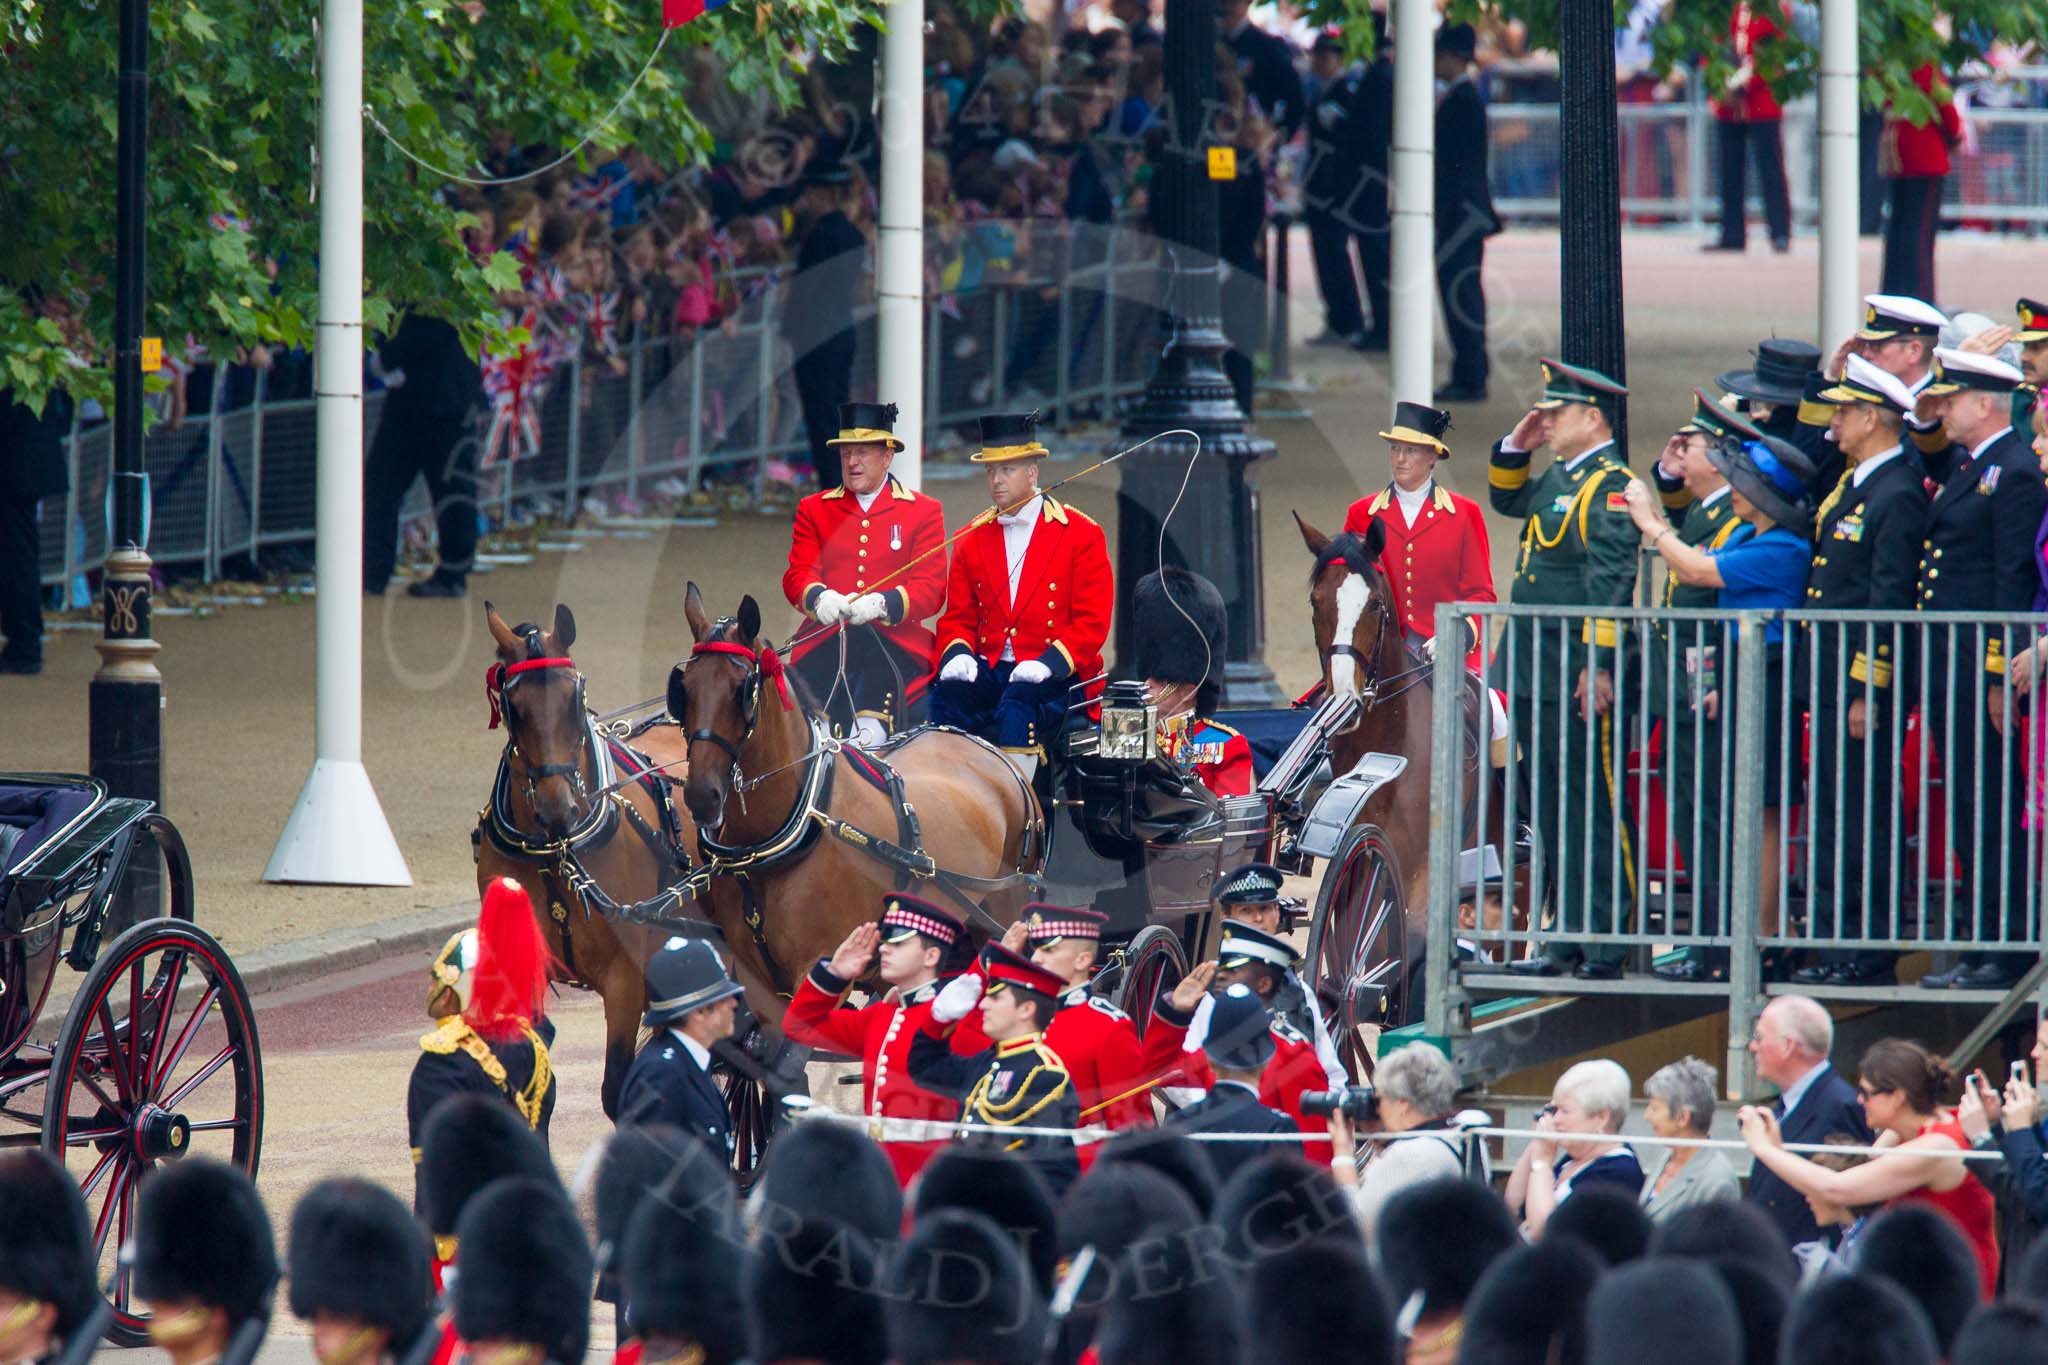 Trooping the Colour 2014.
Horse Guards Parade, Westminster,
London SW1A,

United Kingdom,
on 14 June 2014 at 10:49, image #258